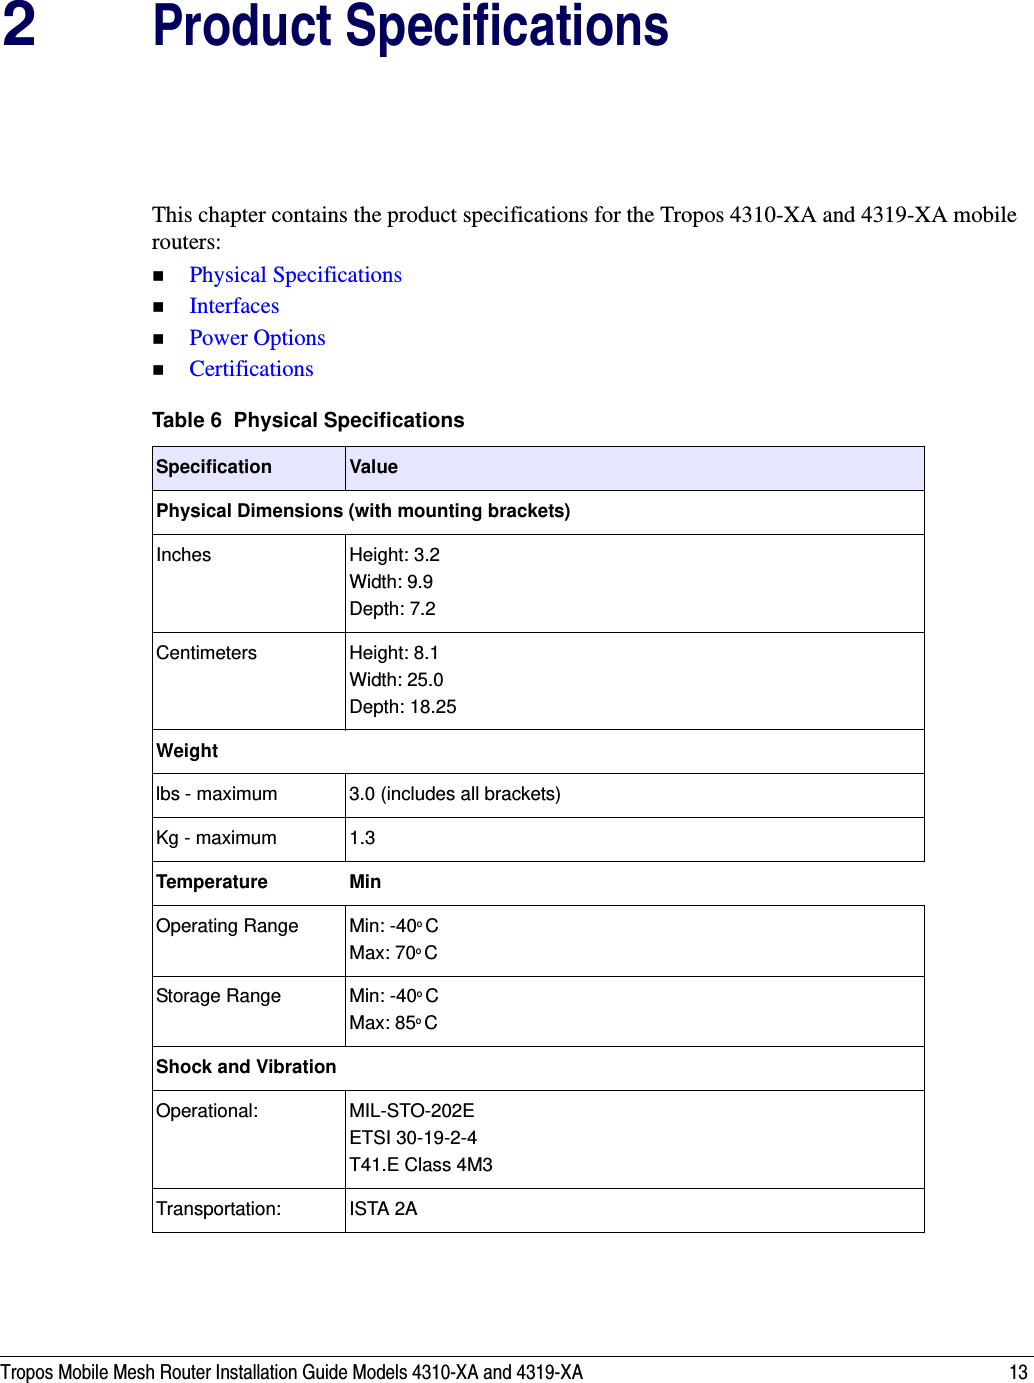 Tropos Mobile Mesh Router Installation Guide Models 4310-XA and 4319-XA 132Product SpecificationsThis chapter contains the product specifications for the Tropos 4310-XA and 4319-XA mobile routers:Physical SpecificationsInterfacesPower OptionsCertificationsTable 6  Physical SpecificationsSpecification ValuePhysical Dimensions (with mounting brackets)Inches Height: 3.2Width: 9.9Depth: 7.2Centimeters Height: 8.1Width: 25.0Depth: 18.25Weightlbs - maximum  3.0 (includes all brackets)Kg - maximum 1.3Temperature MinOperating Range Min: -40o CMax: 70o CStorage Range Min: -40o CMax: 85o CShock and VibrationOperational: MIL-STO-202EETSI 30-19-2-4T41.E Class 4M3Transportation: ISTA 2A